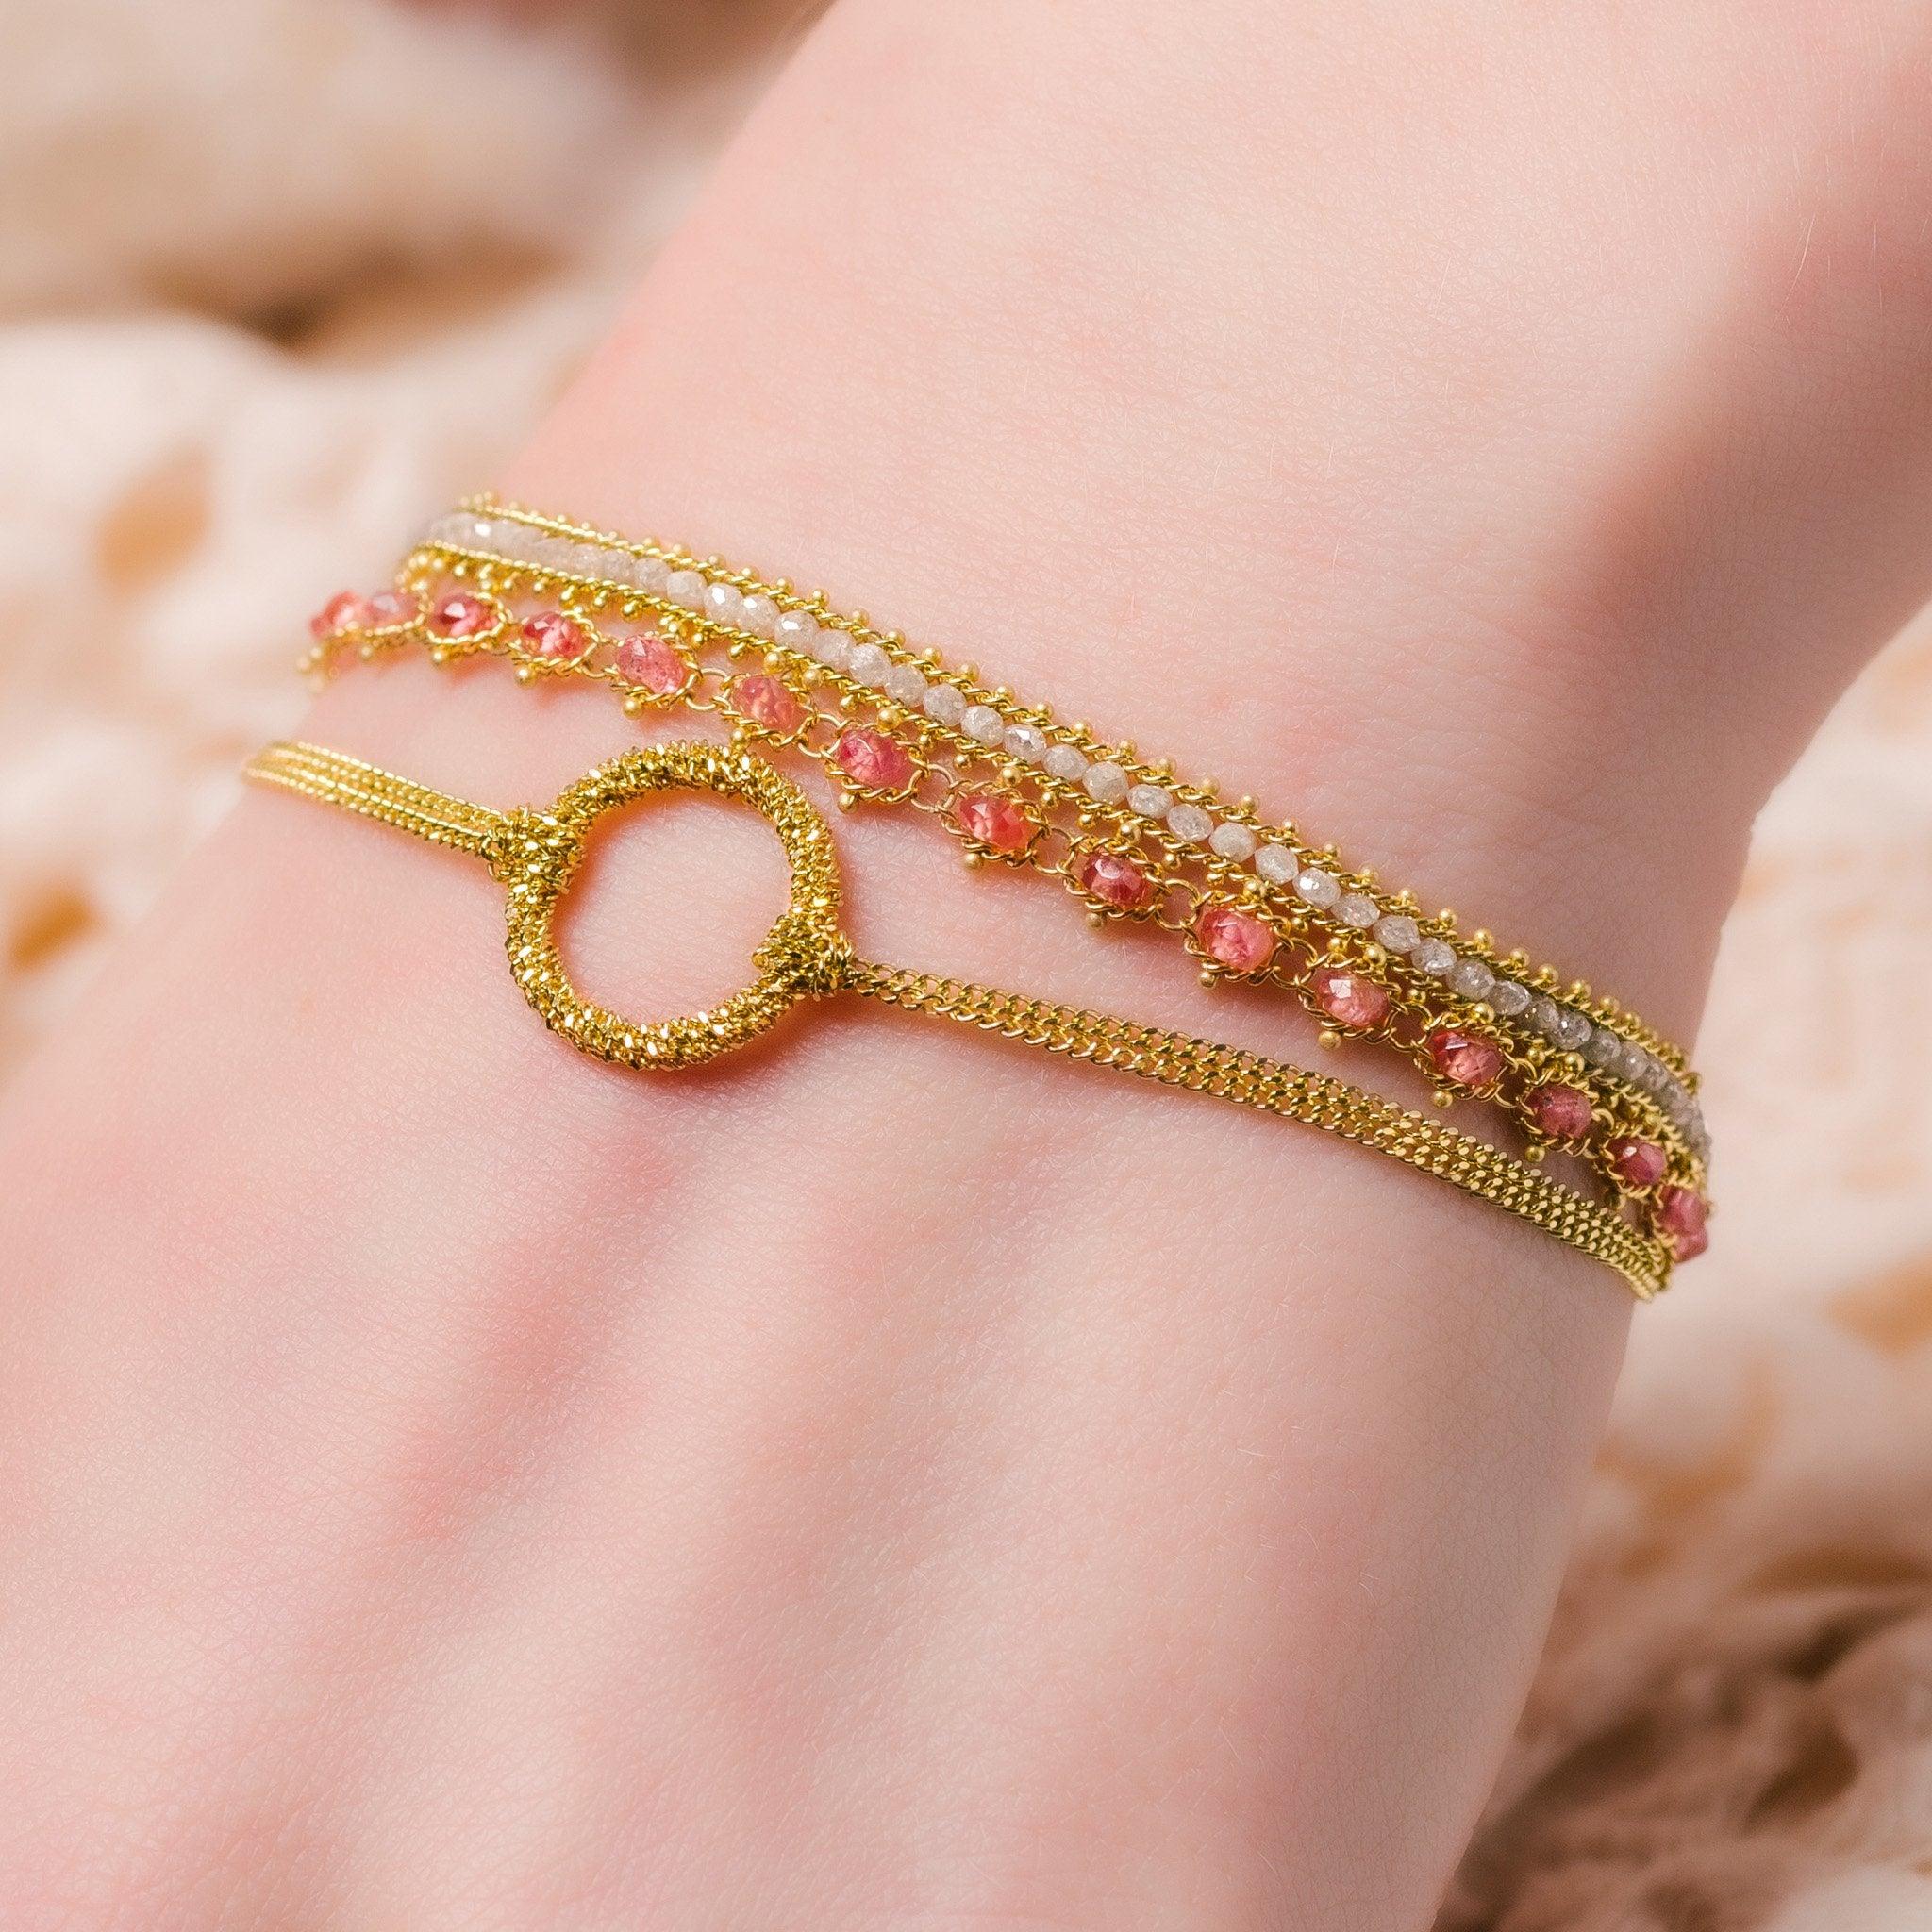 This deceptively simple bracelet has a secret: the links of its handmade, diamond-cut 18K yellow gold chains have the ability to reflect ambient light so brilliantly that you’ll think you’re wearing strands of glimmering starlight. The two luxurious